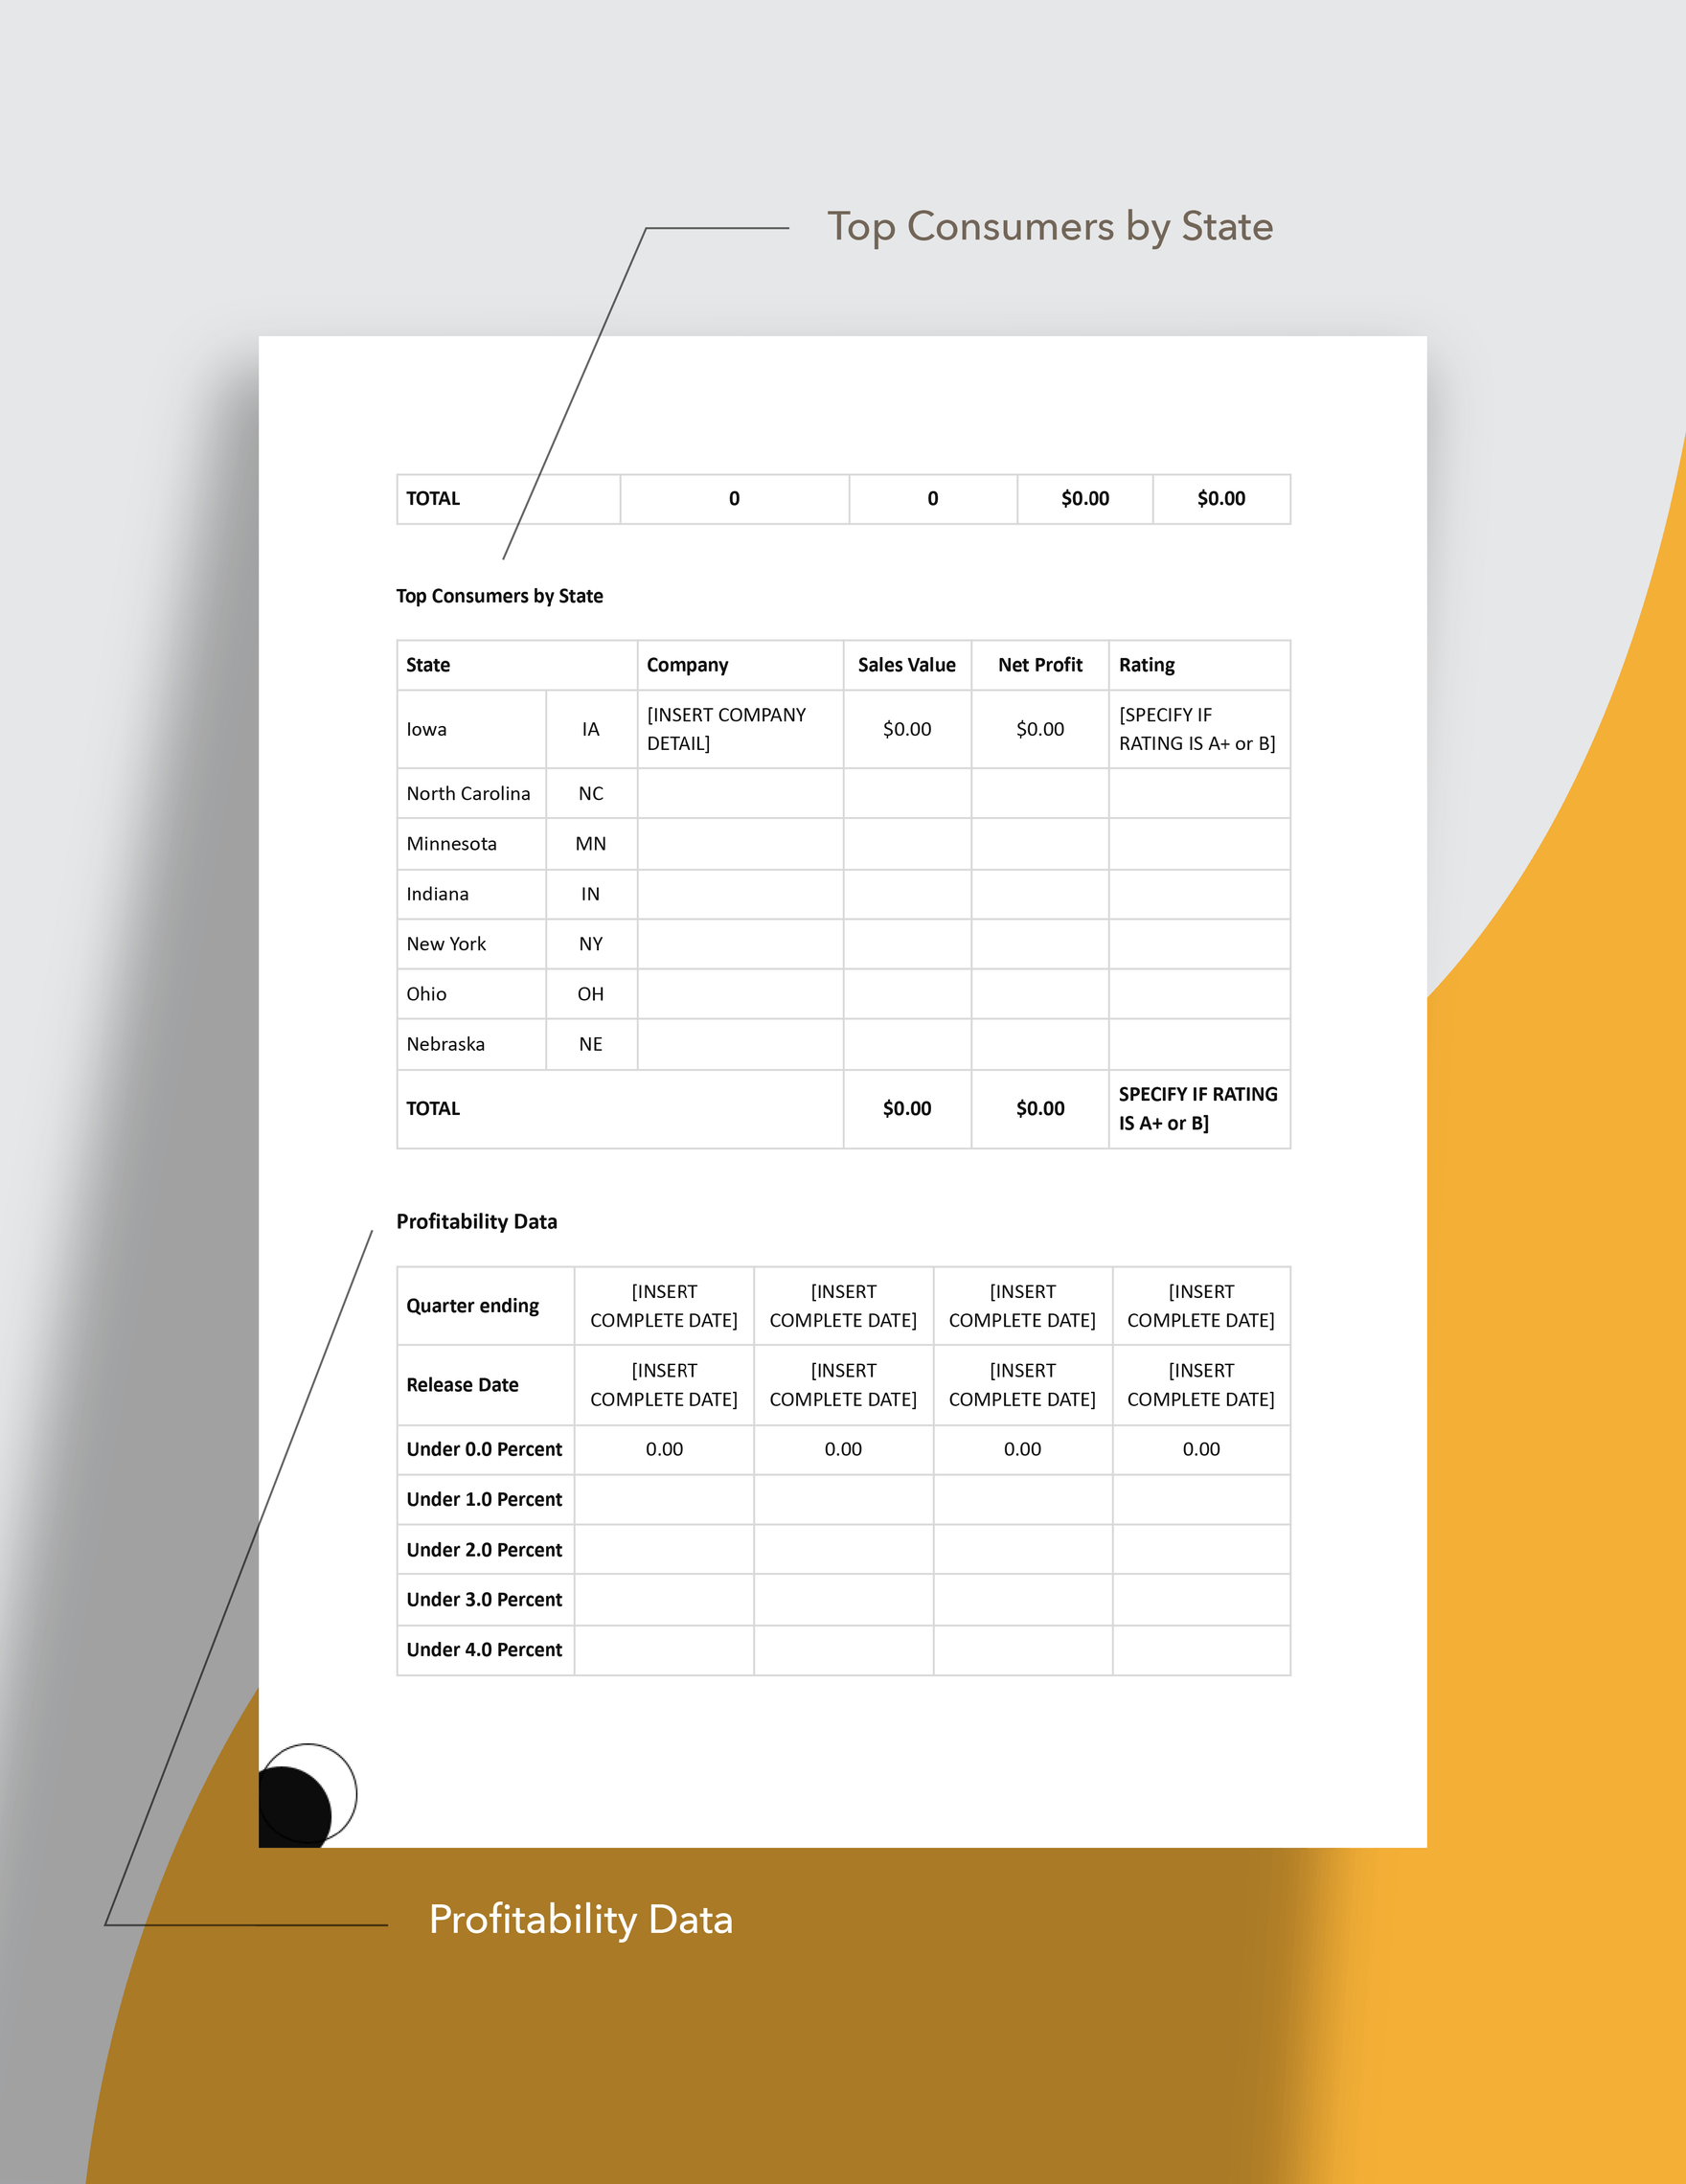 Business Research Report Template